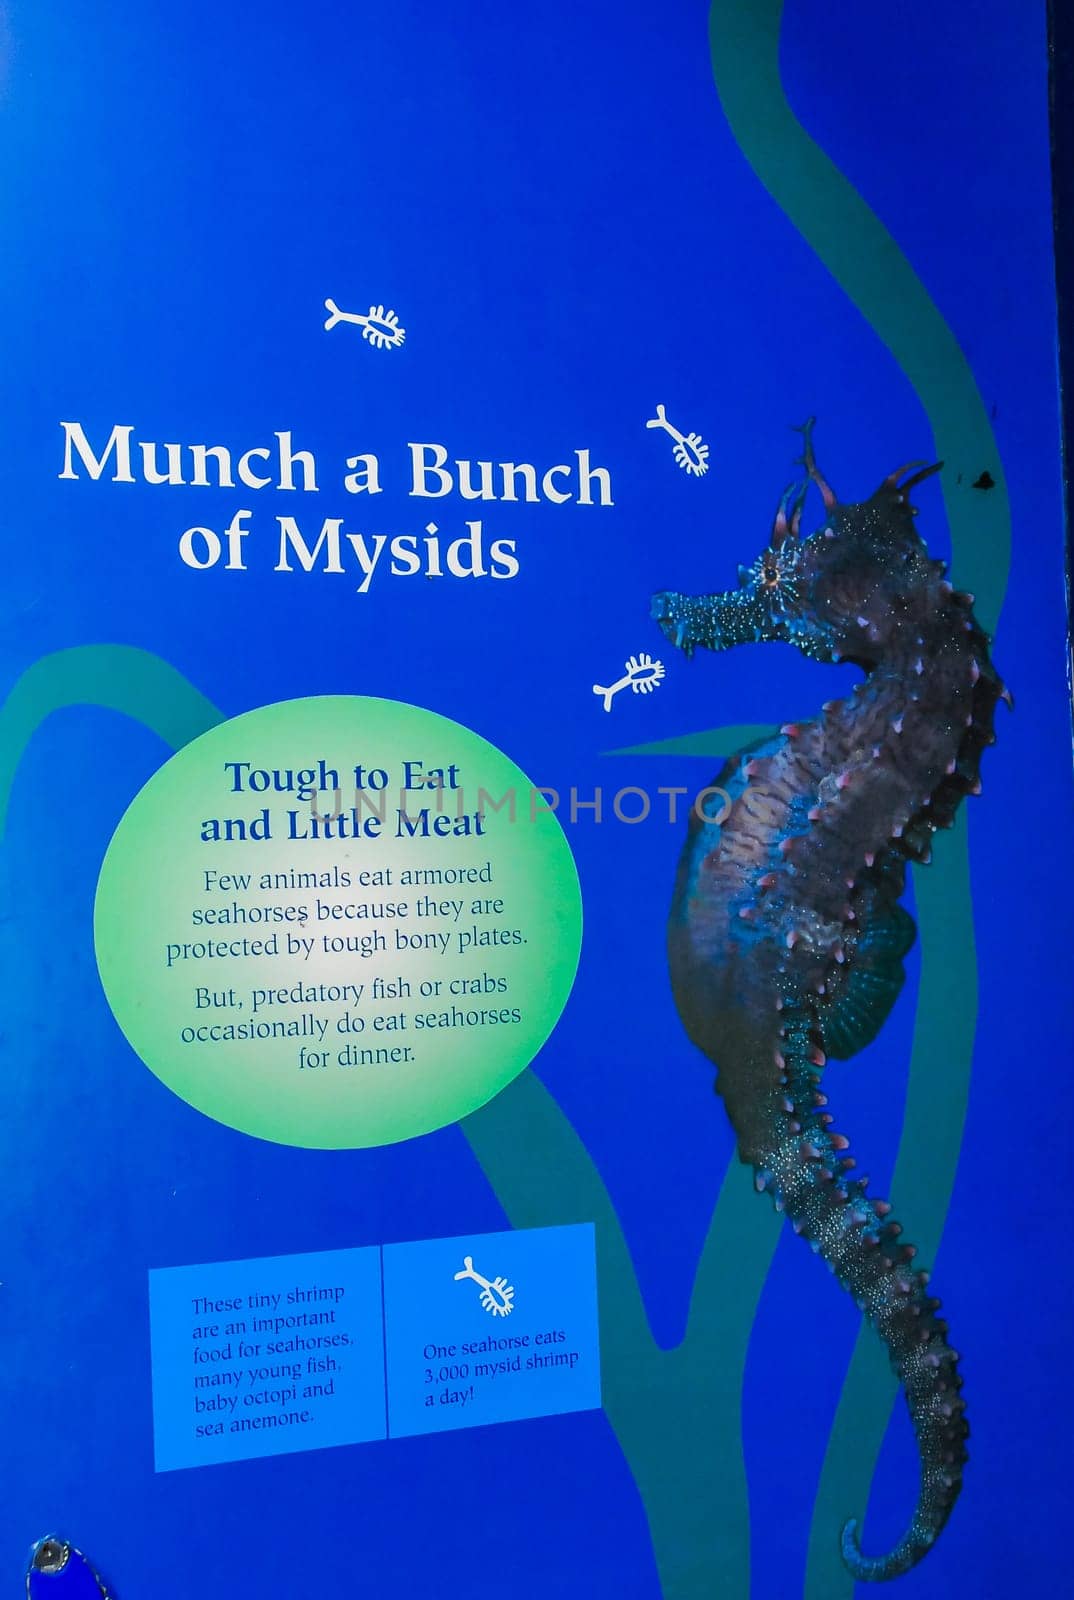 NEW YORK, USA - DECEMBER 06, 2011: information stand about seahorses in the aquarium